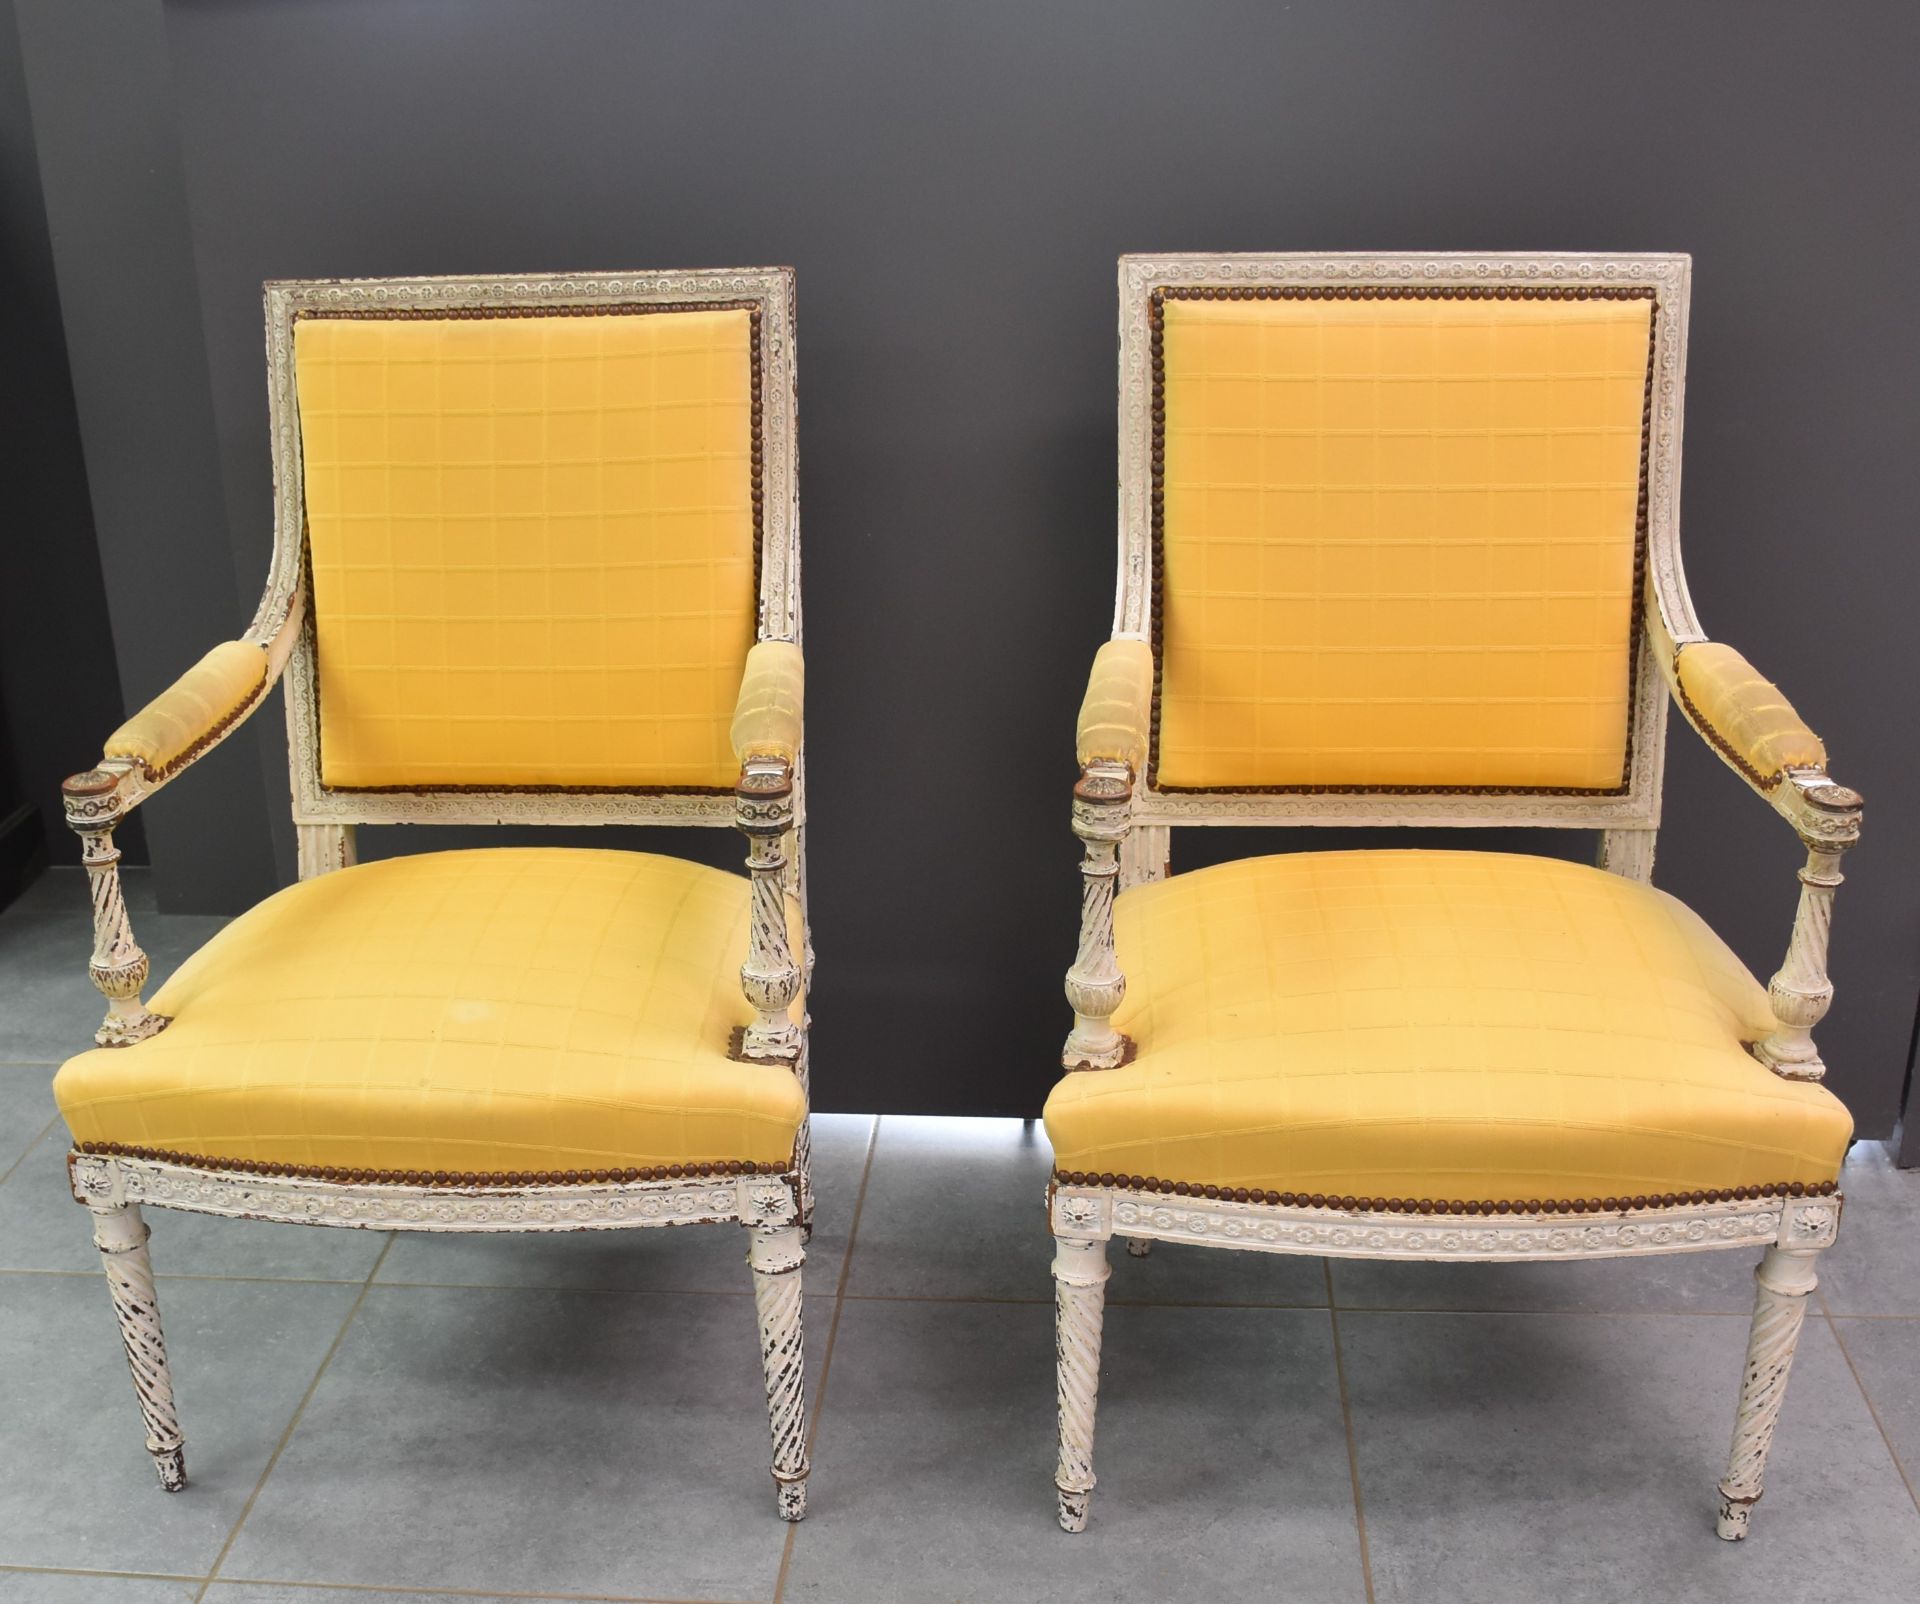 Pair of Louis XVI style armchairs with grey patina.